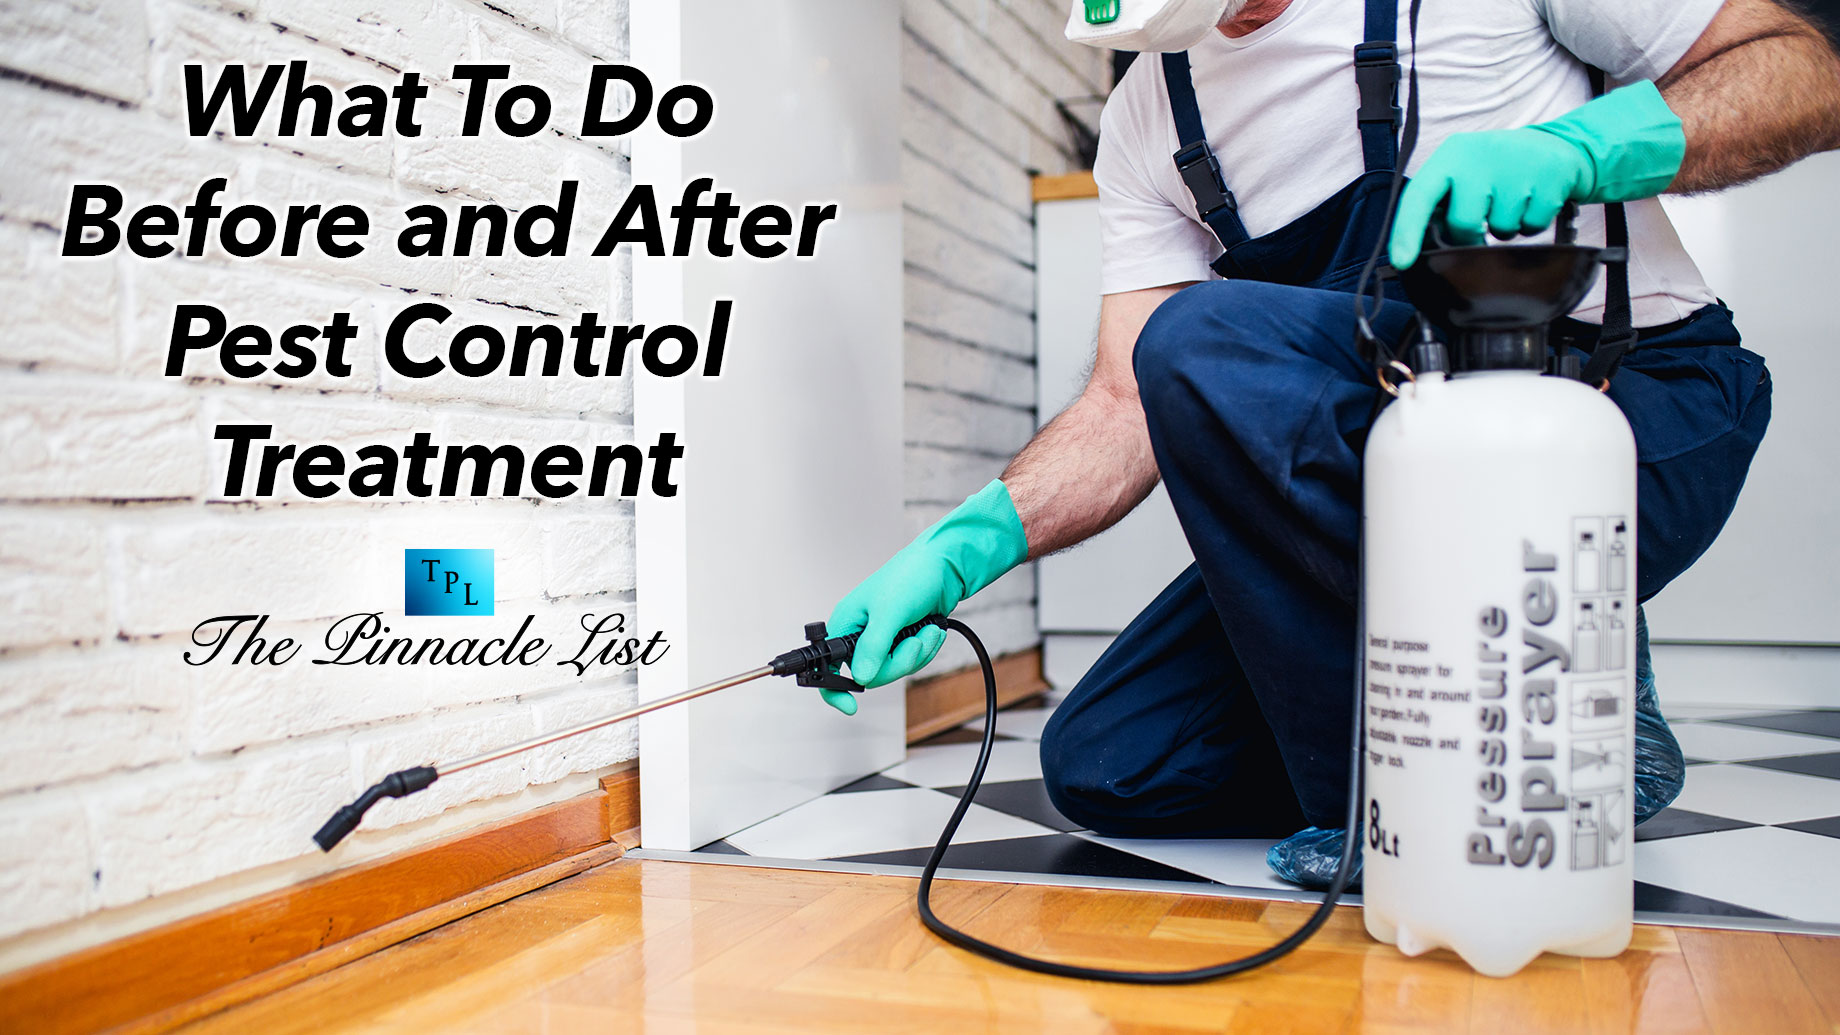 What To Do Before and After Pest Control Treatment